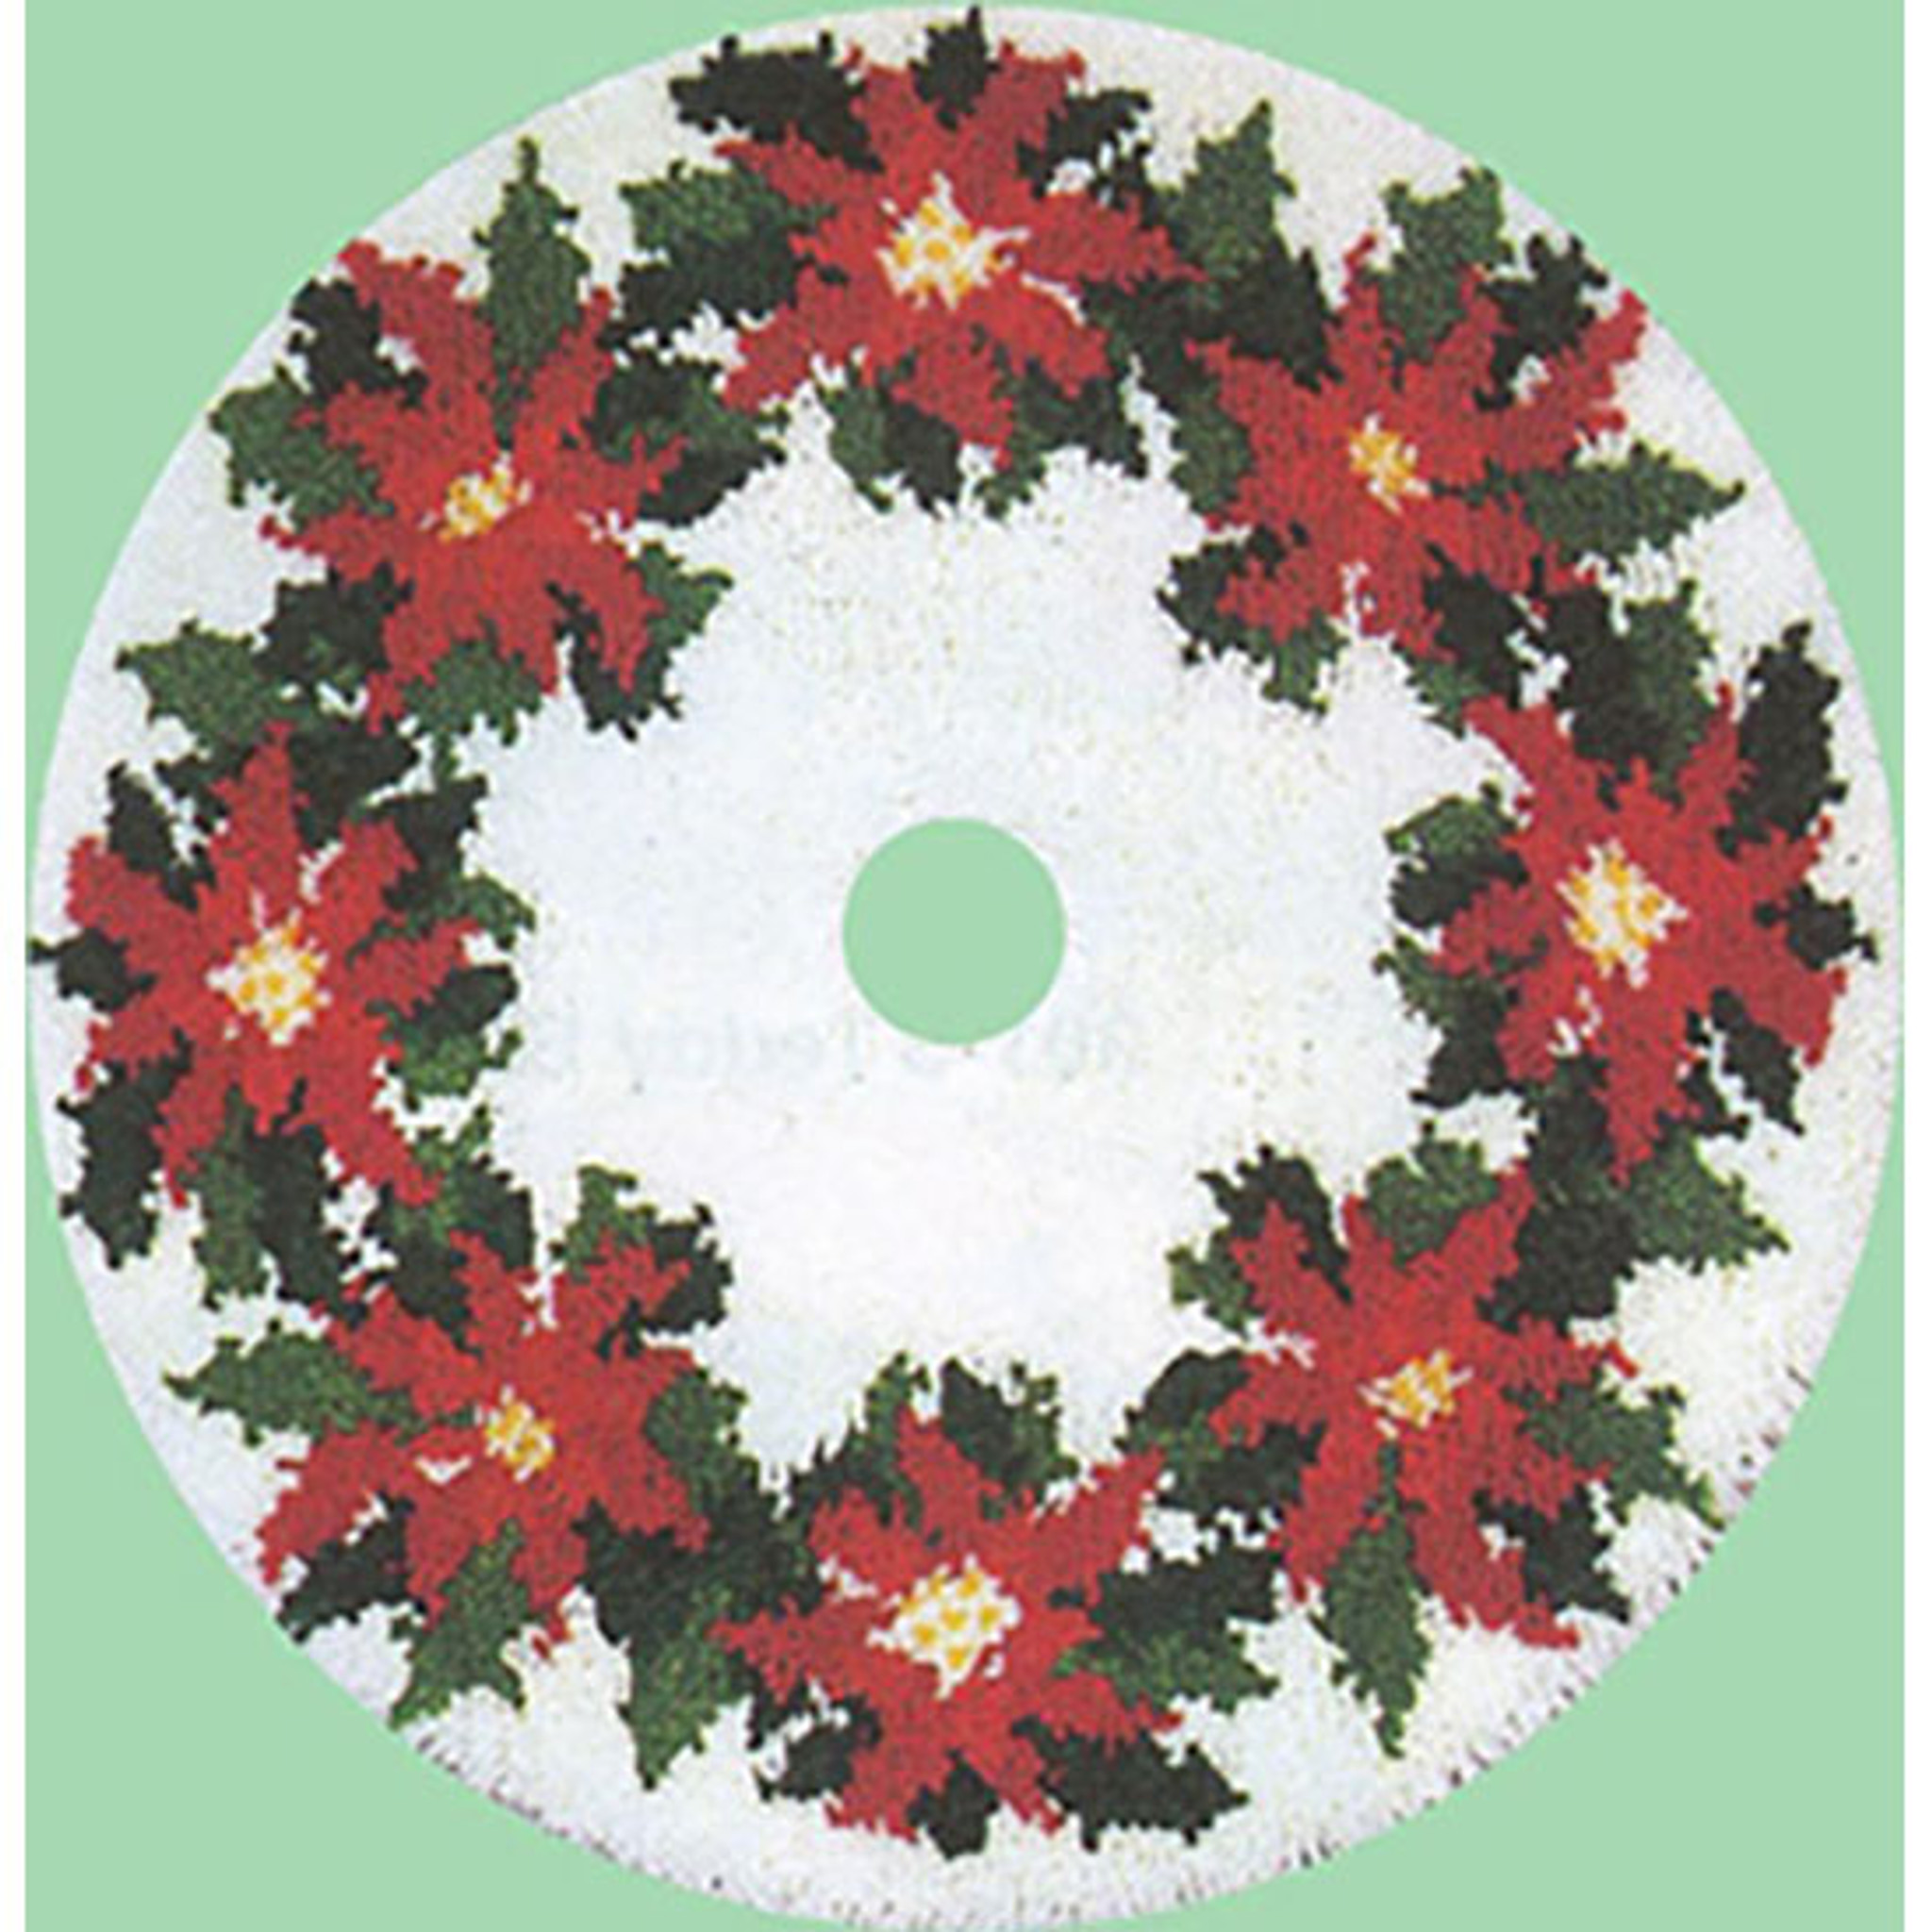 Poinsettia DIY Punch Embroidery Kit